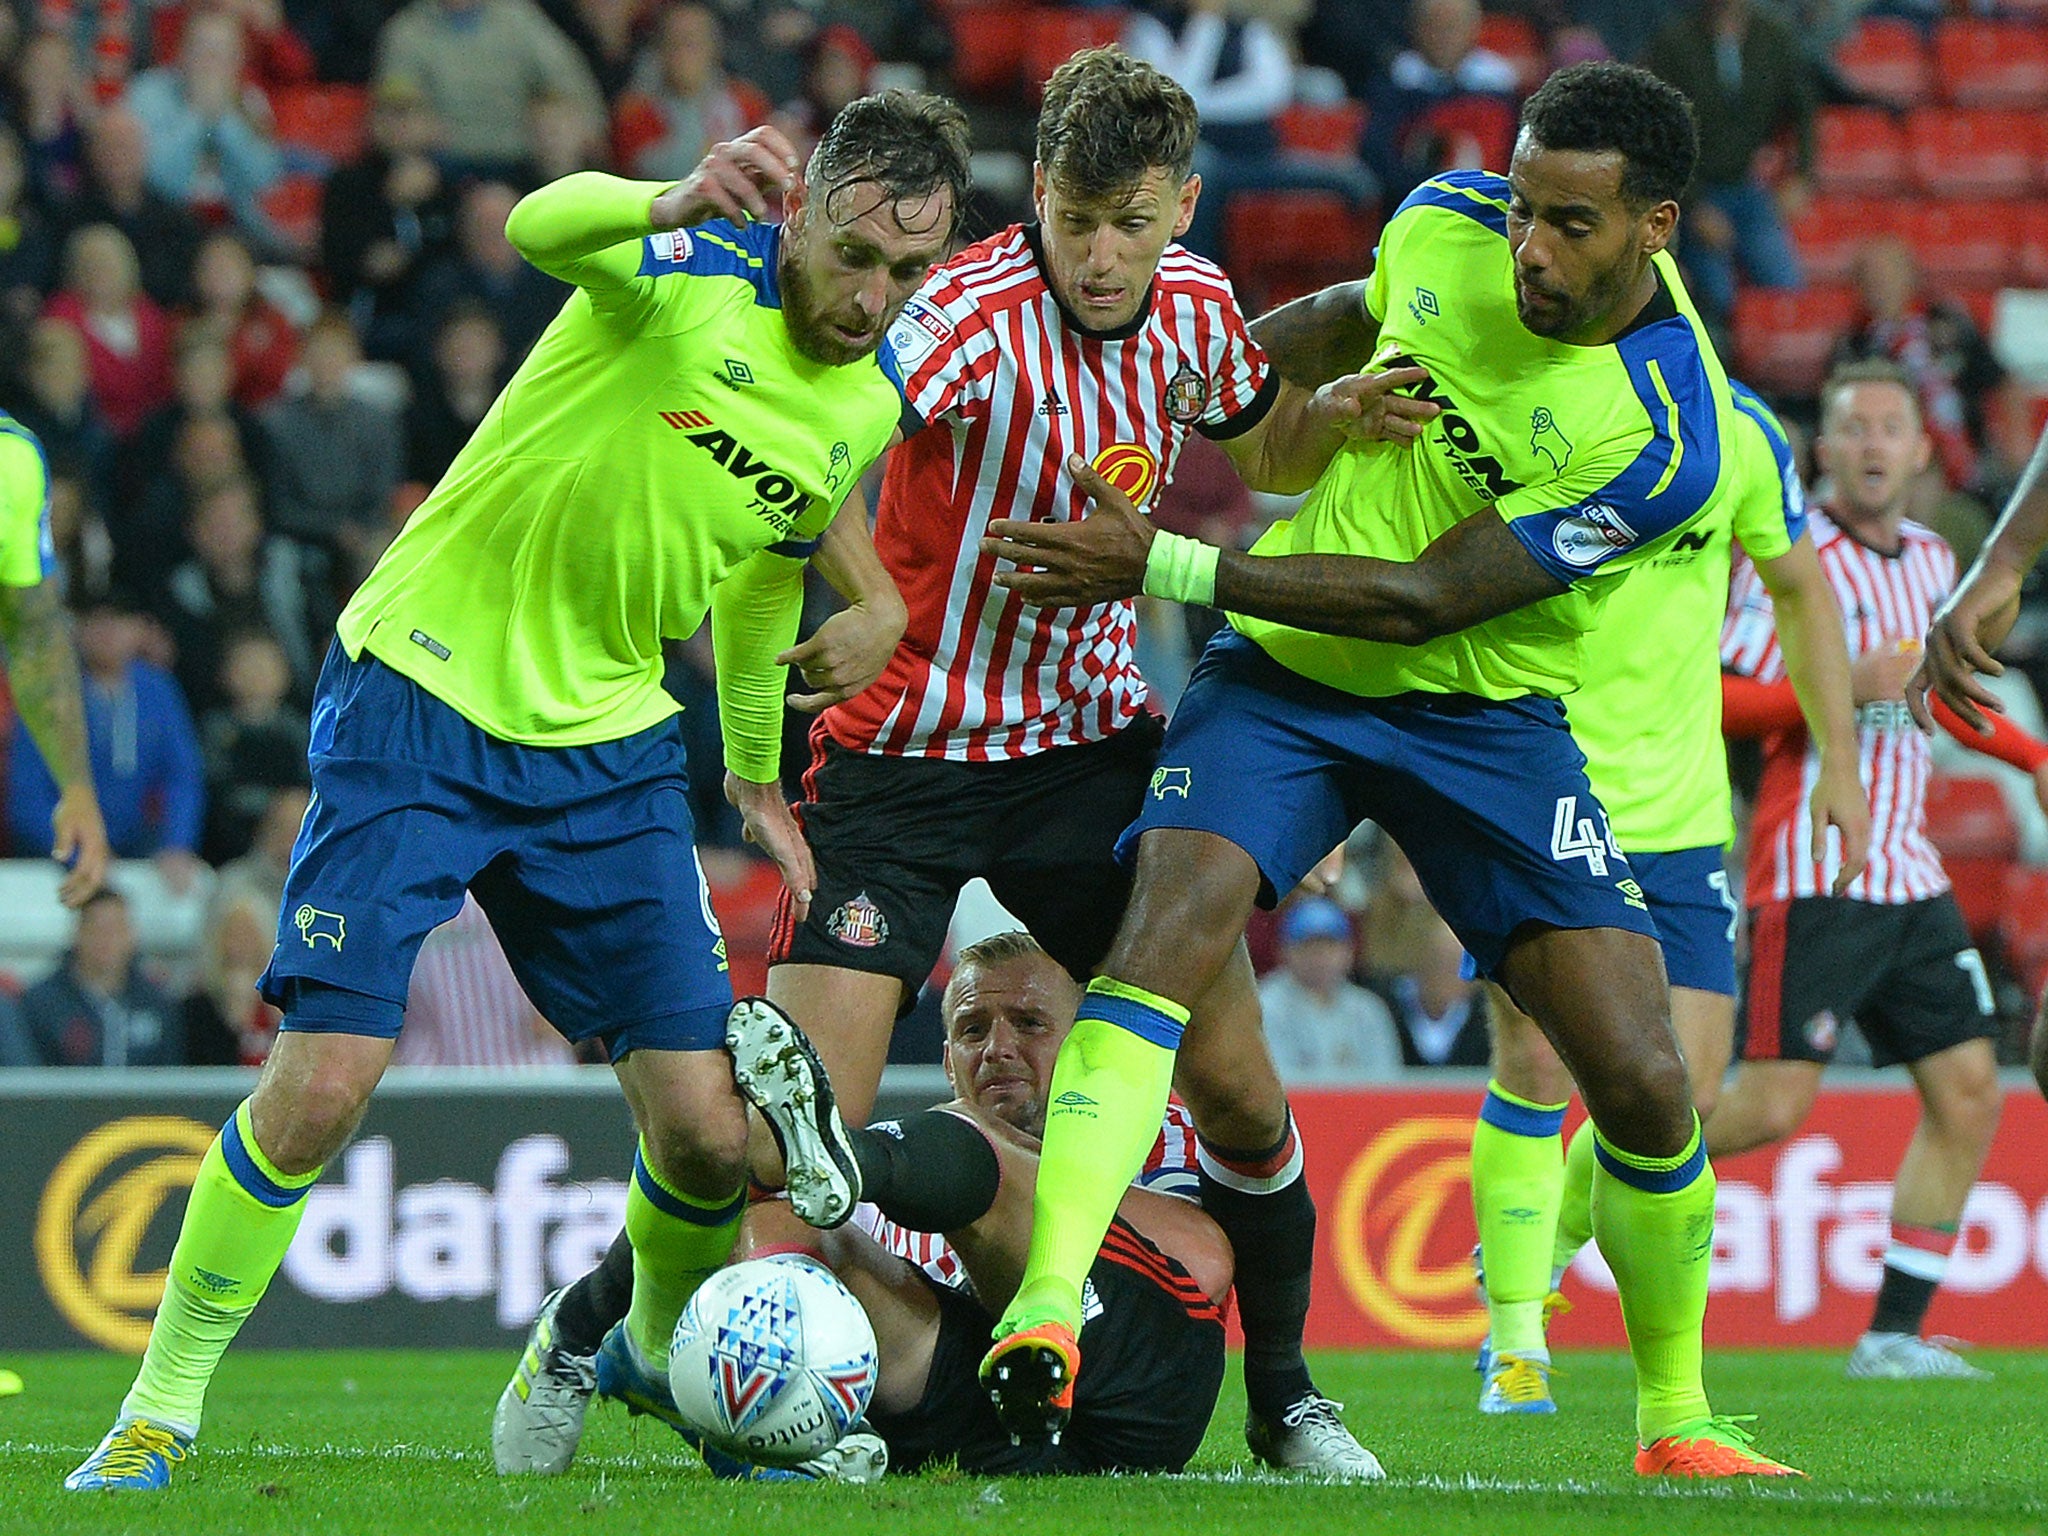 Sunderland drew 1-1 with Derby earlier this month